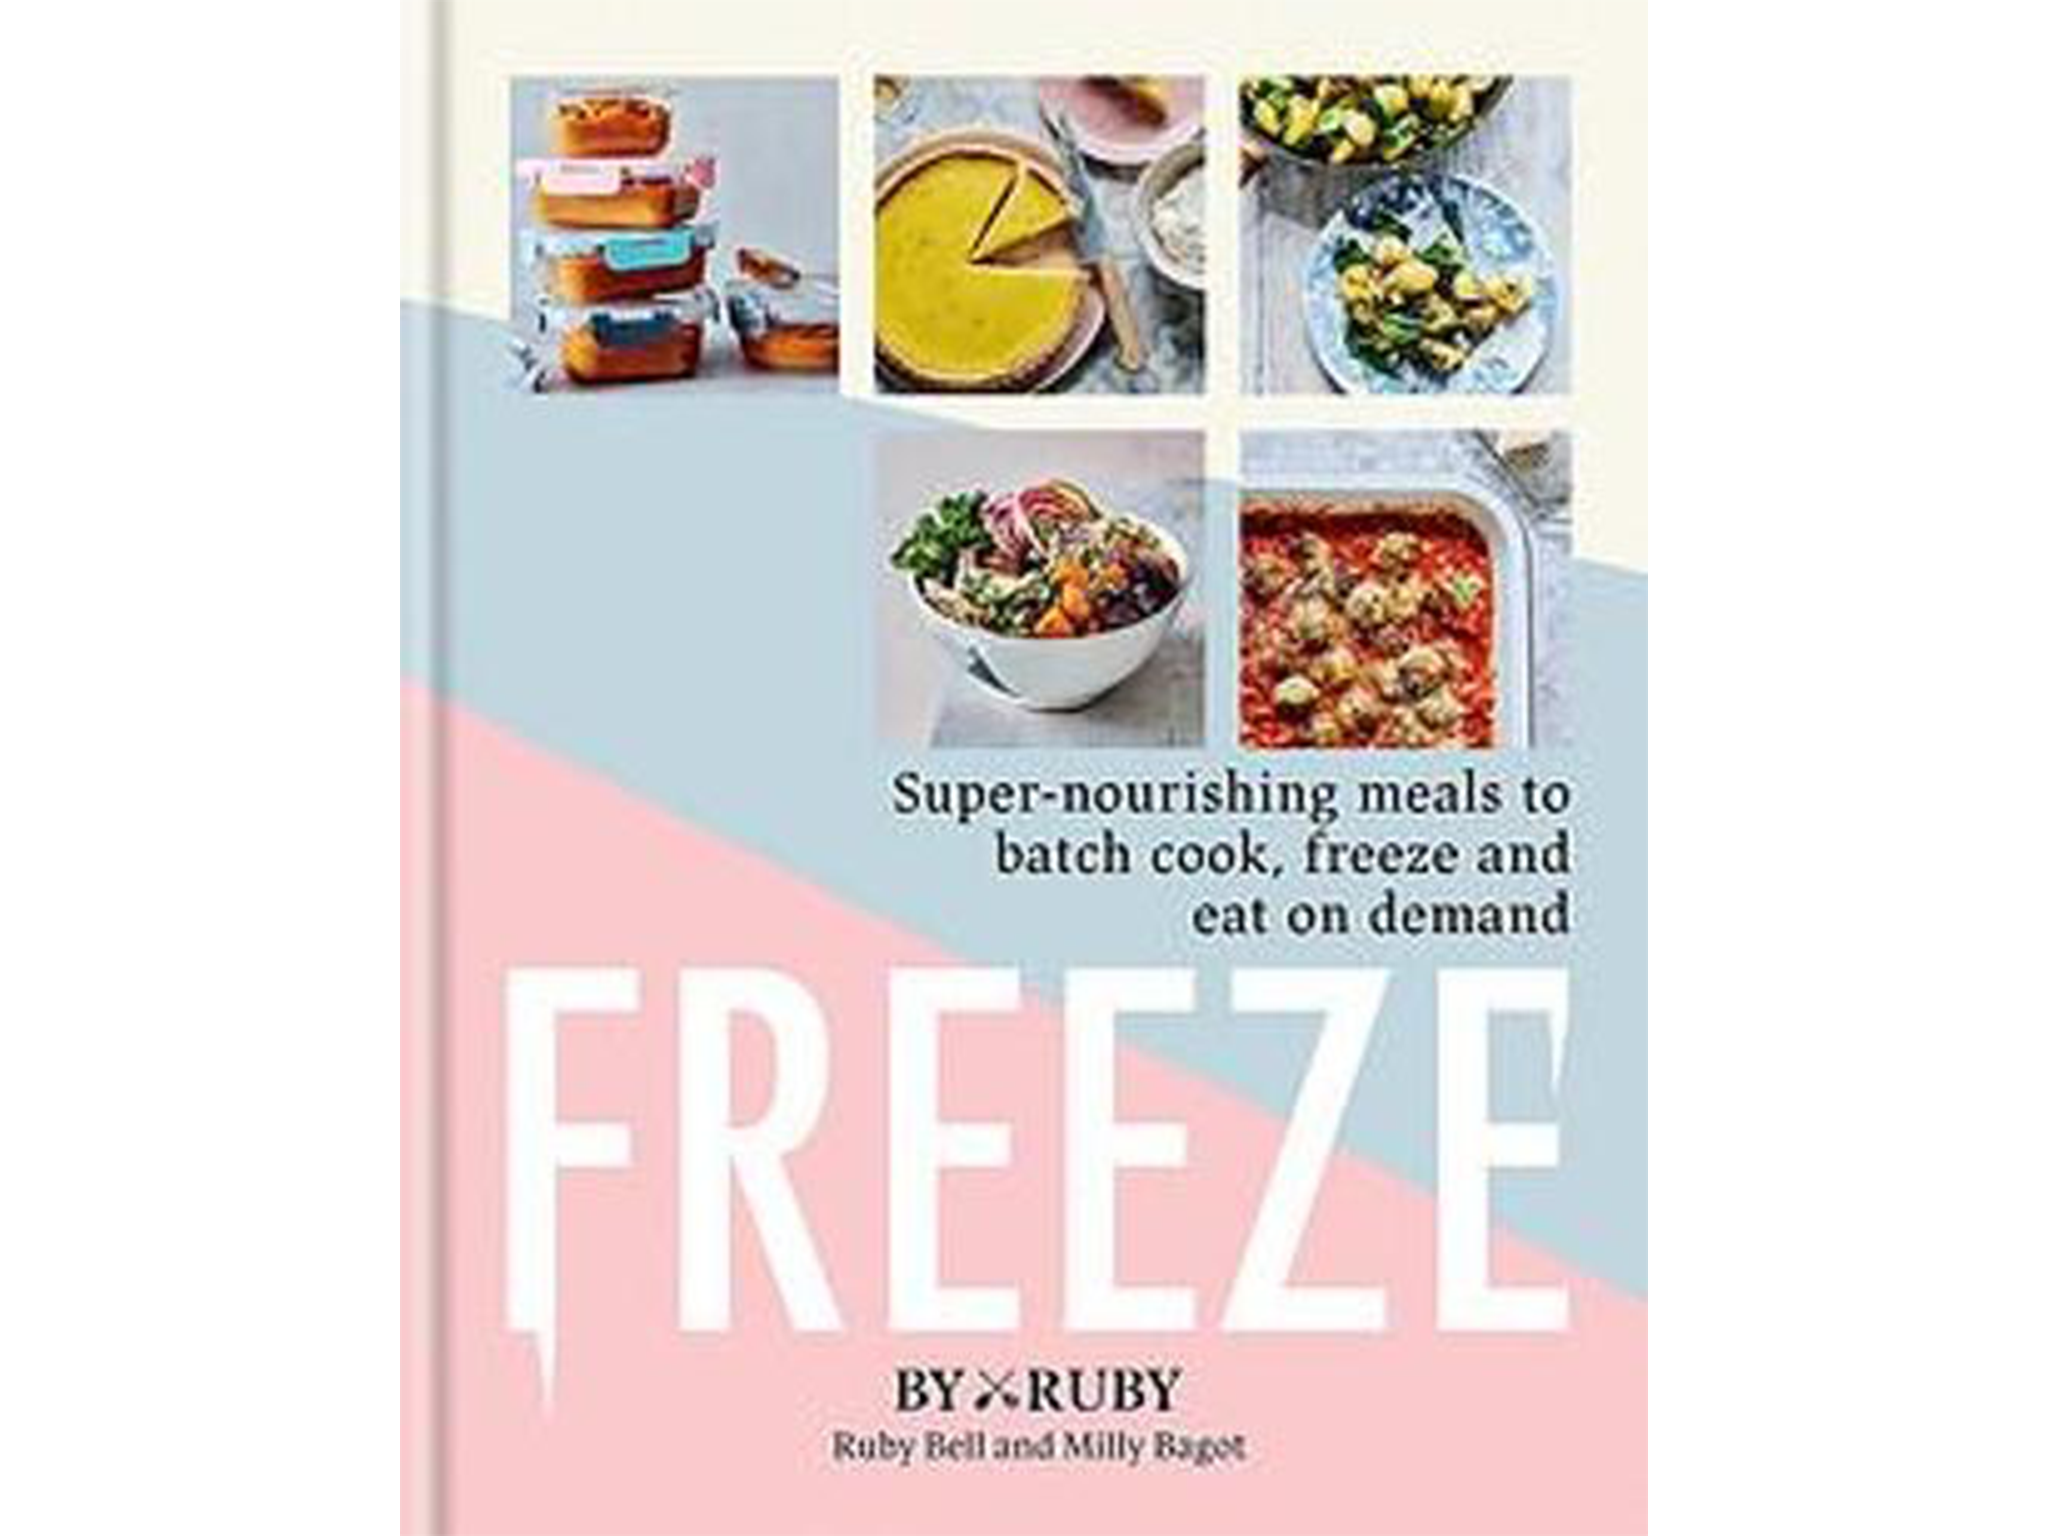 ‘FREEZE’ by Ruby Bell and Milly Bagot, published by Mitchell Beazley